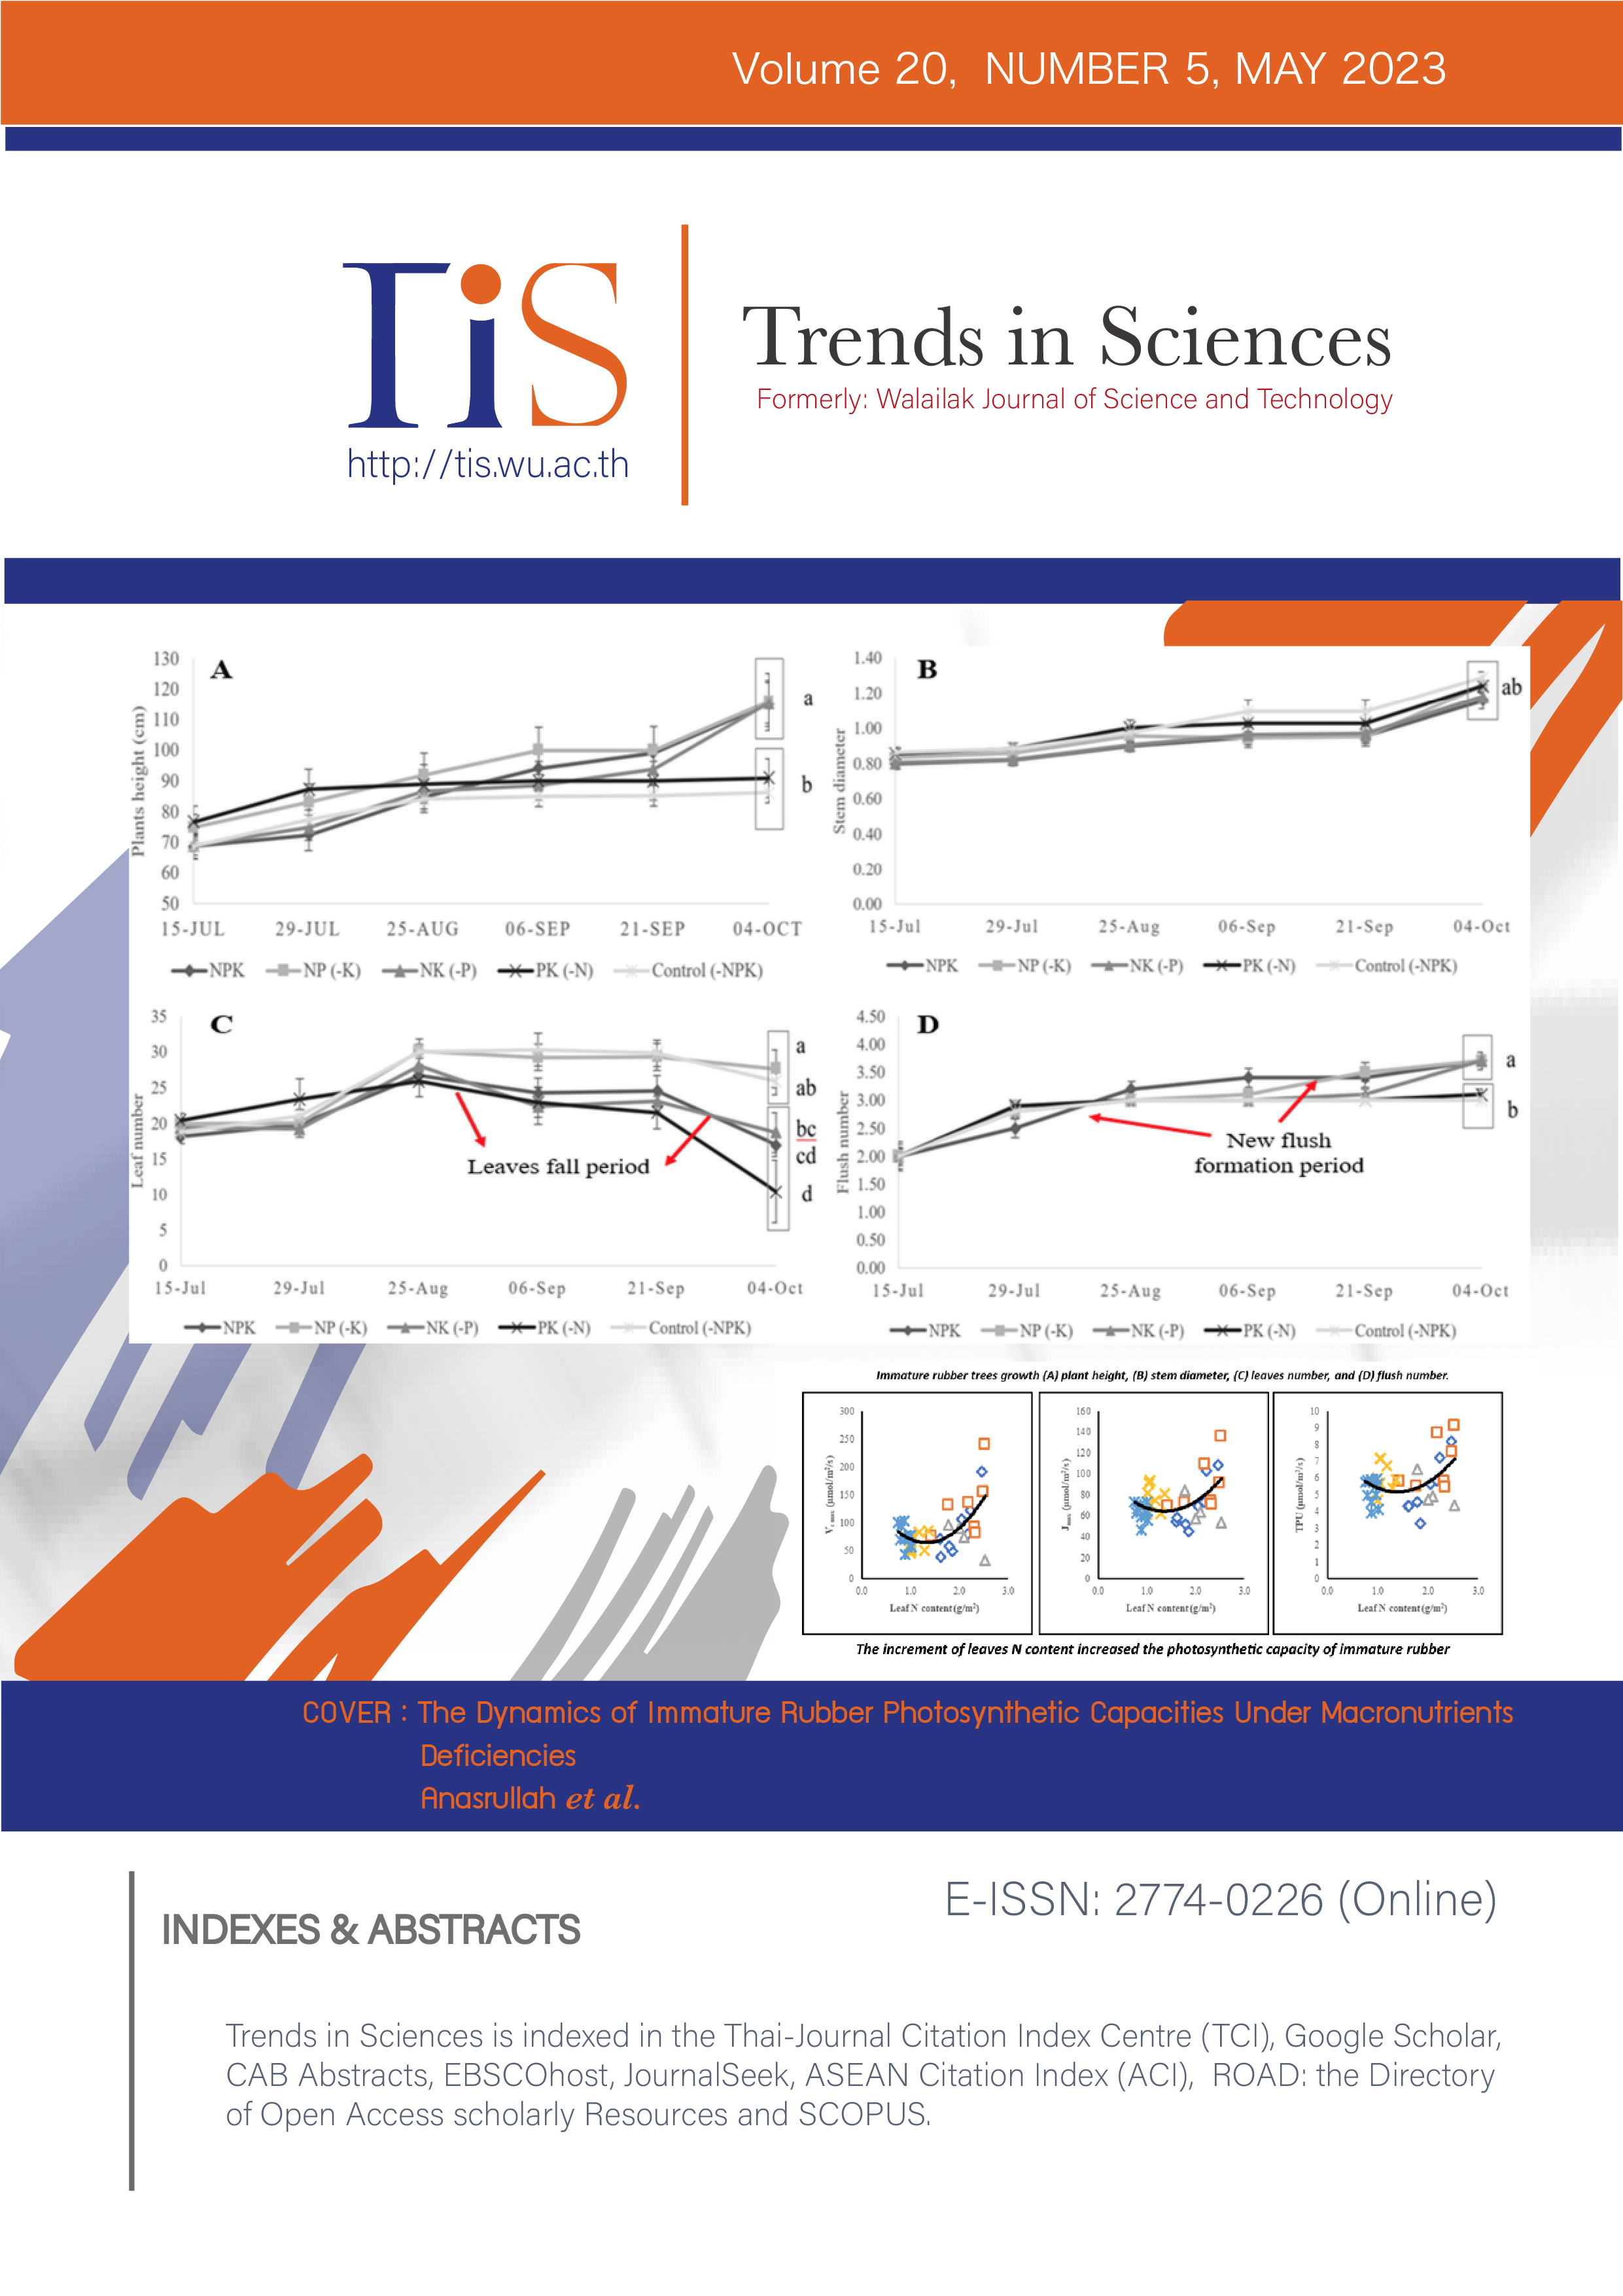 					View Vol. 20 No. 5 (2023): Trends in Sciences, Volume 20, Number 5, May 2023
				